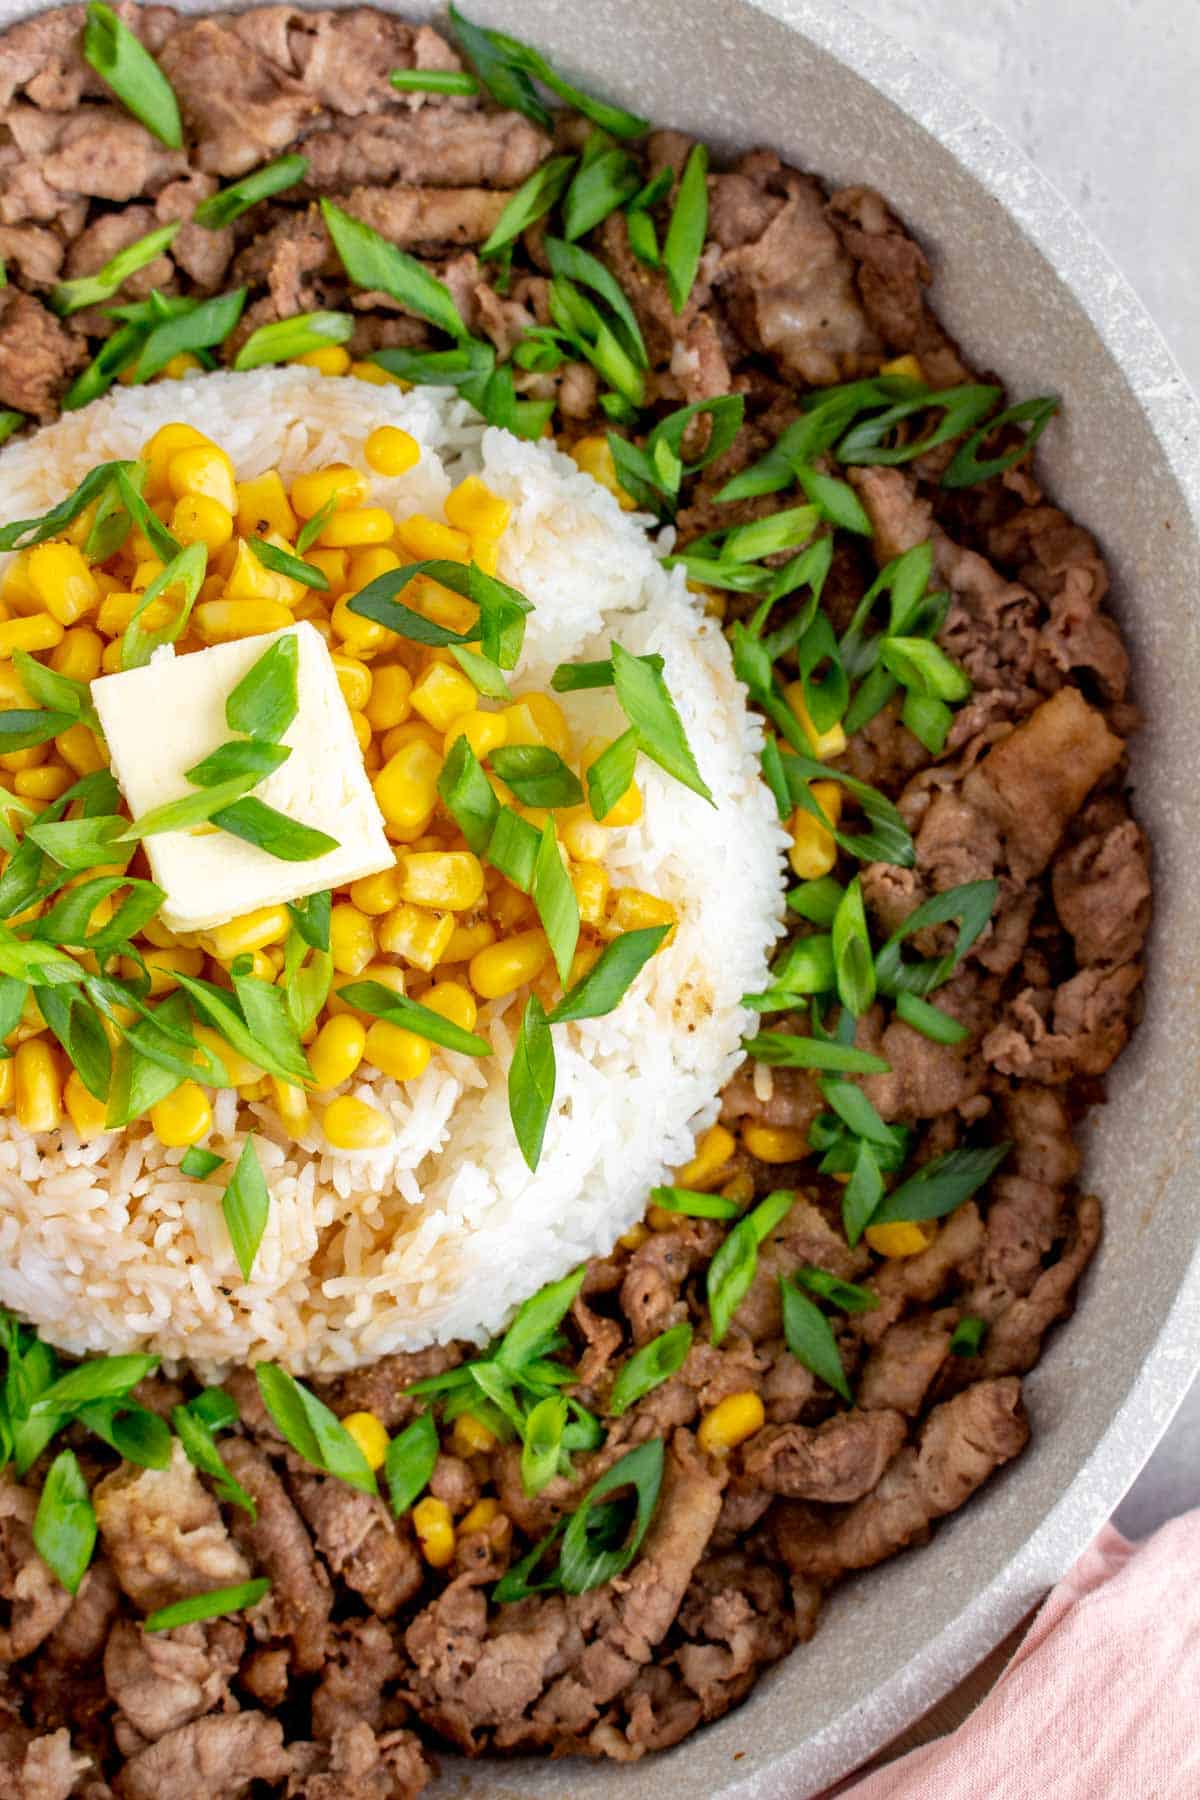 Close up of a dome of rice with corn, green onions, and butter on top, surrounded by stir fried beef.